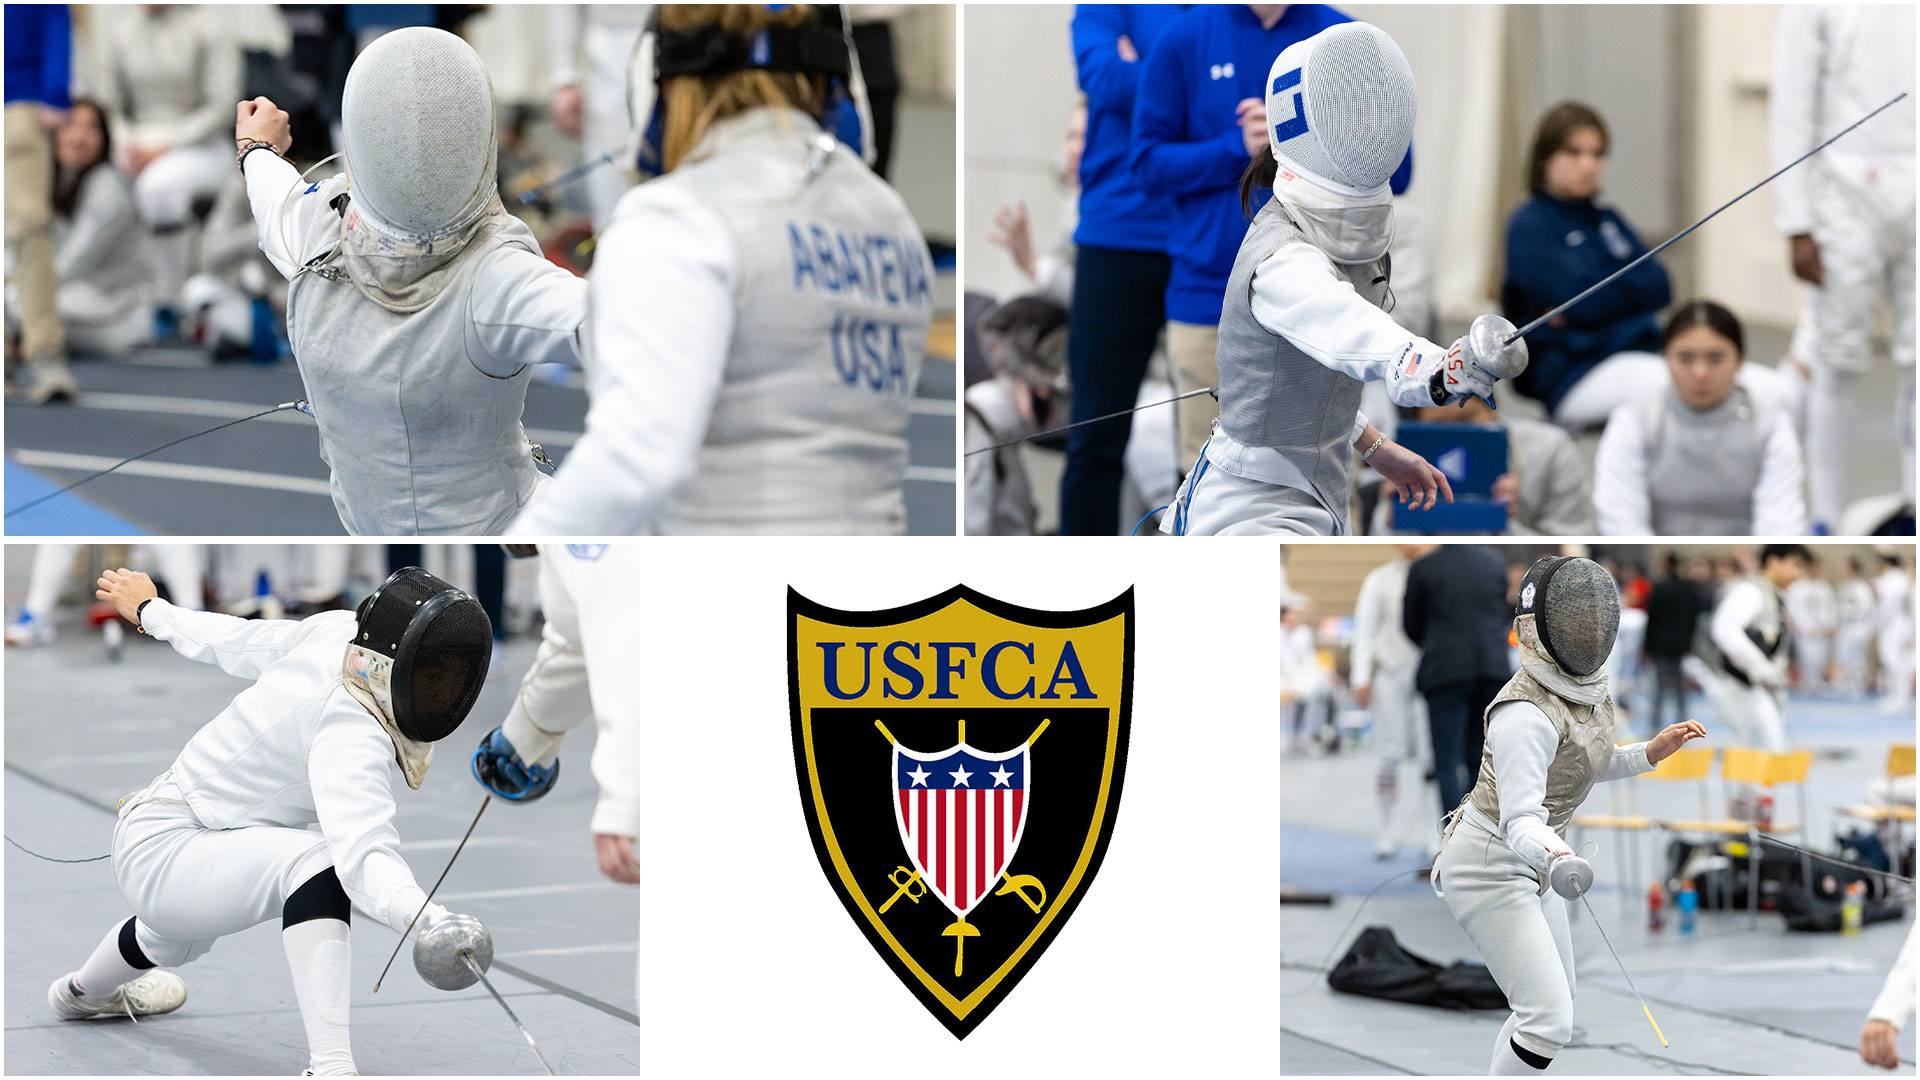 Four members of Wellesley fencing made the USFCA All-Region team (Frank Poulin)